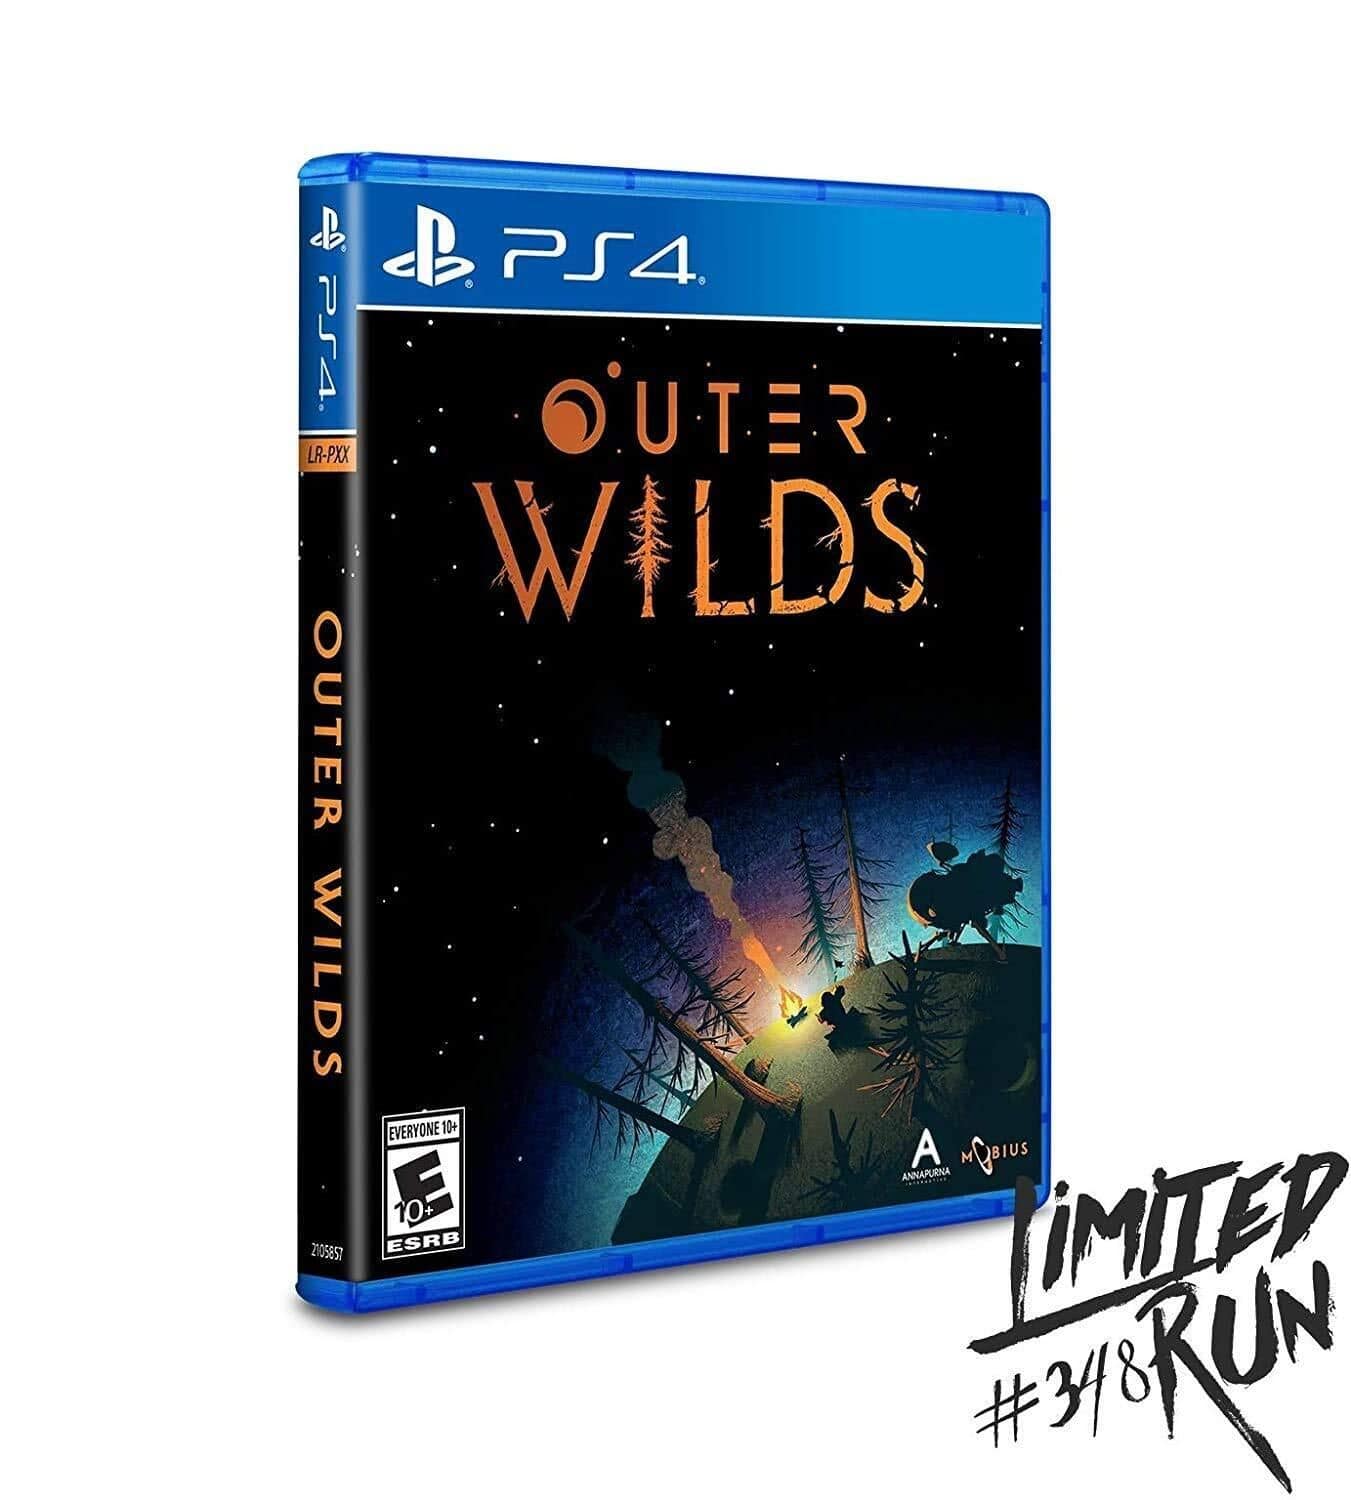 Outer wilds